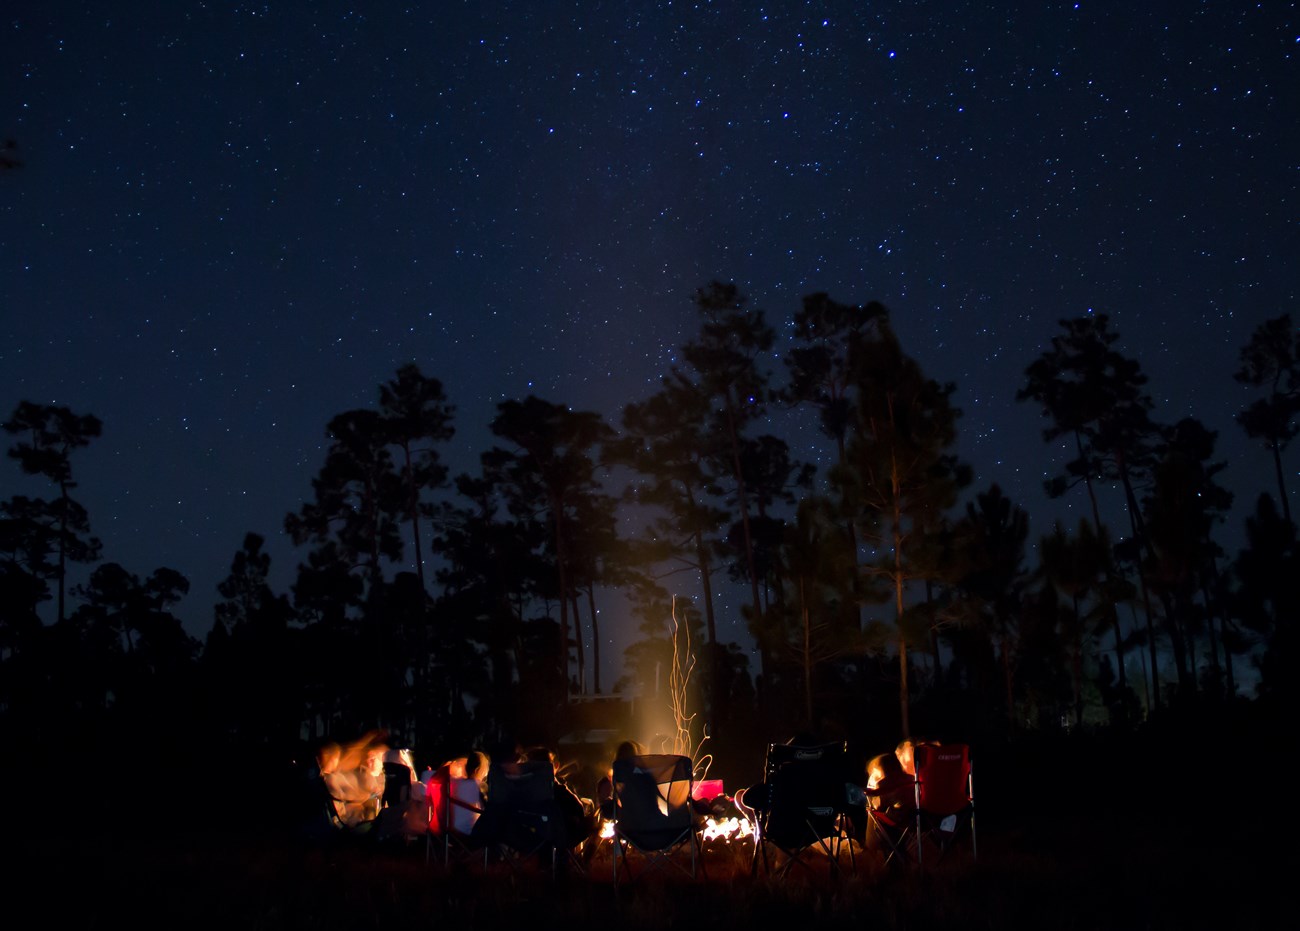 A group of people sit around a campfire with stars overhead